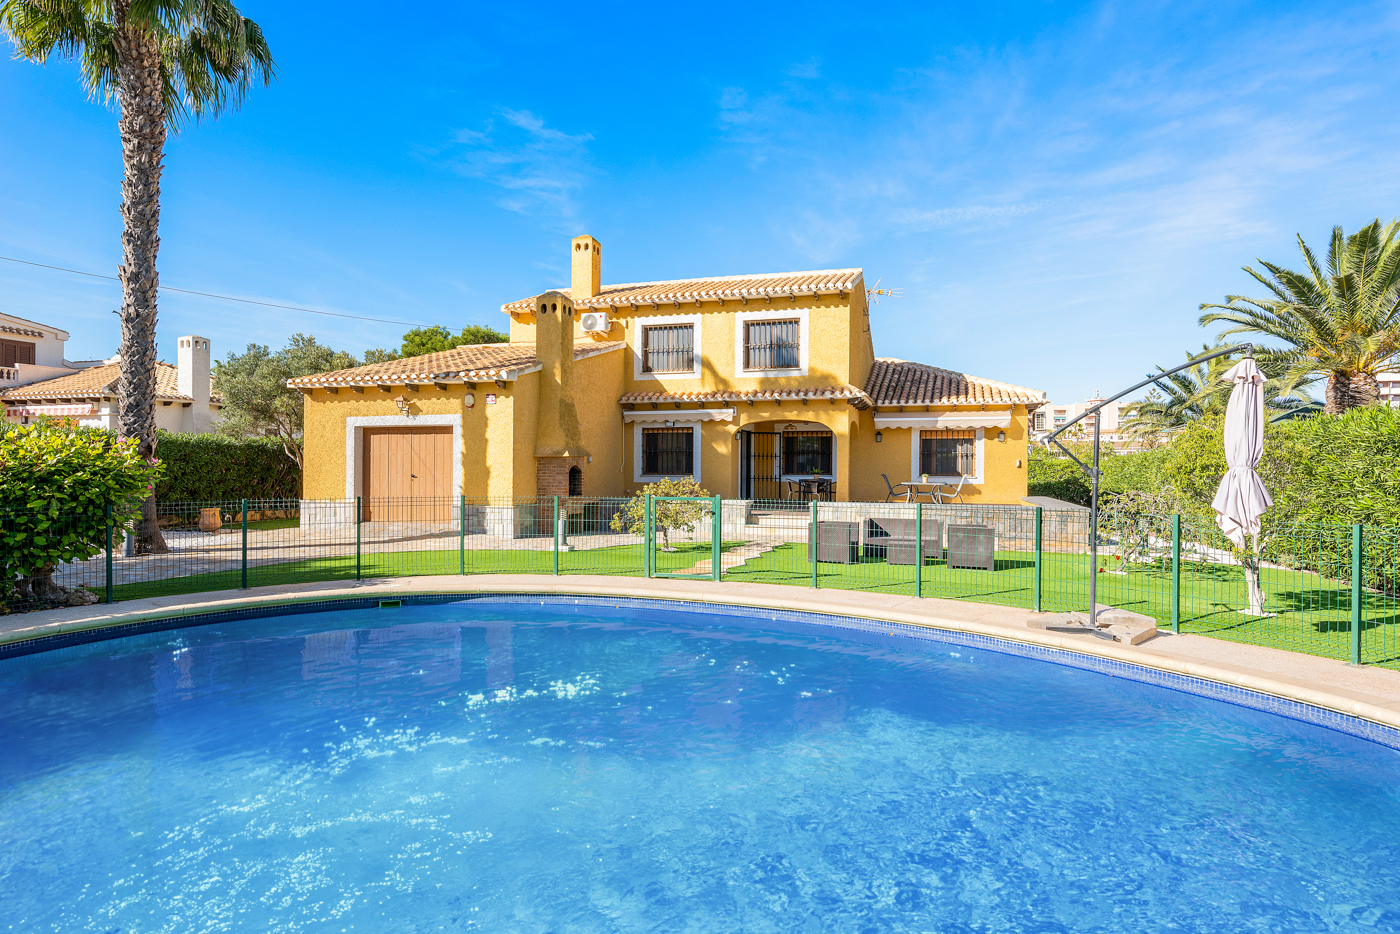 For sale: House / Villa in Cabo Roig